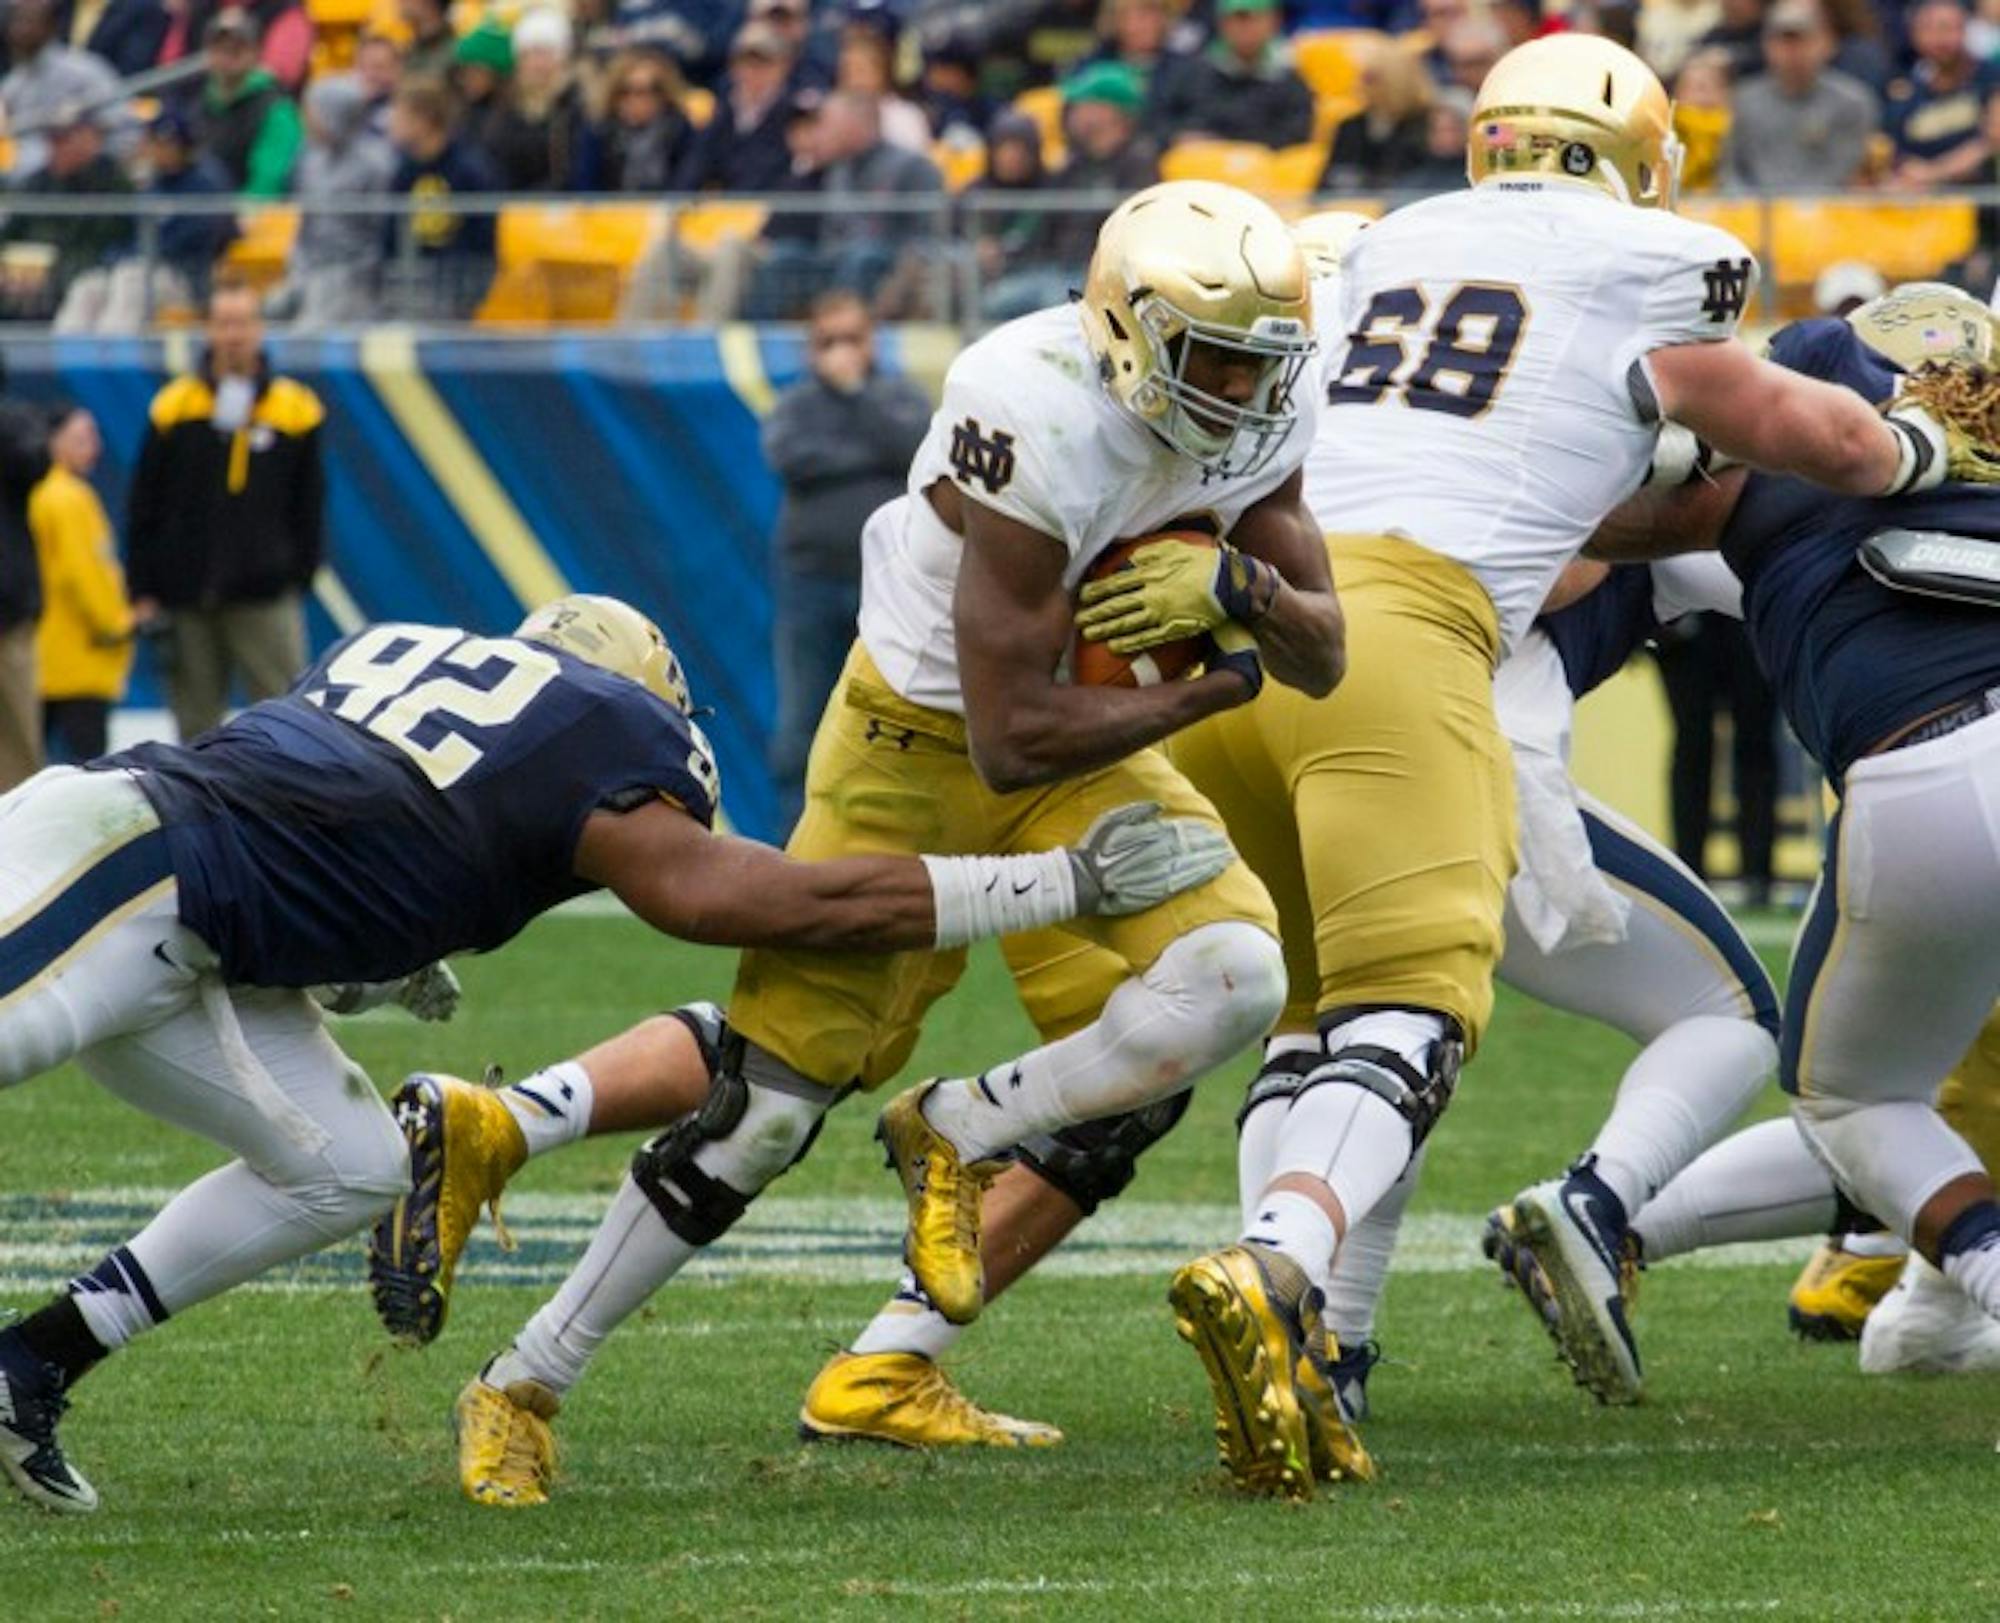 Freshman Josh Adams breaks through the line during Notre Dame’s 42-30 win over Pittsburgh on Saturday at Heinz Field. Adams rushed for 147 yards on 20 touches to lead the Irish ground game.